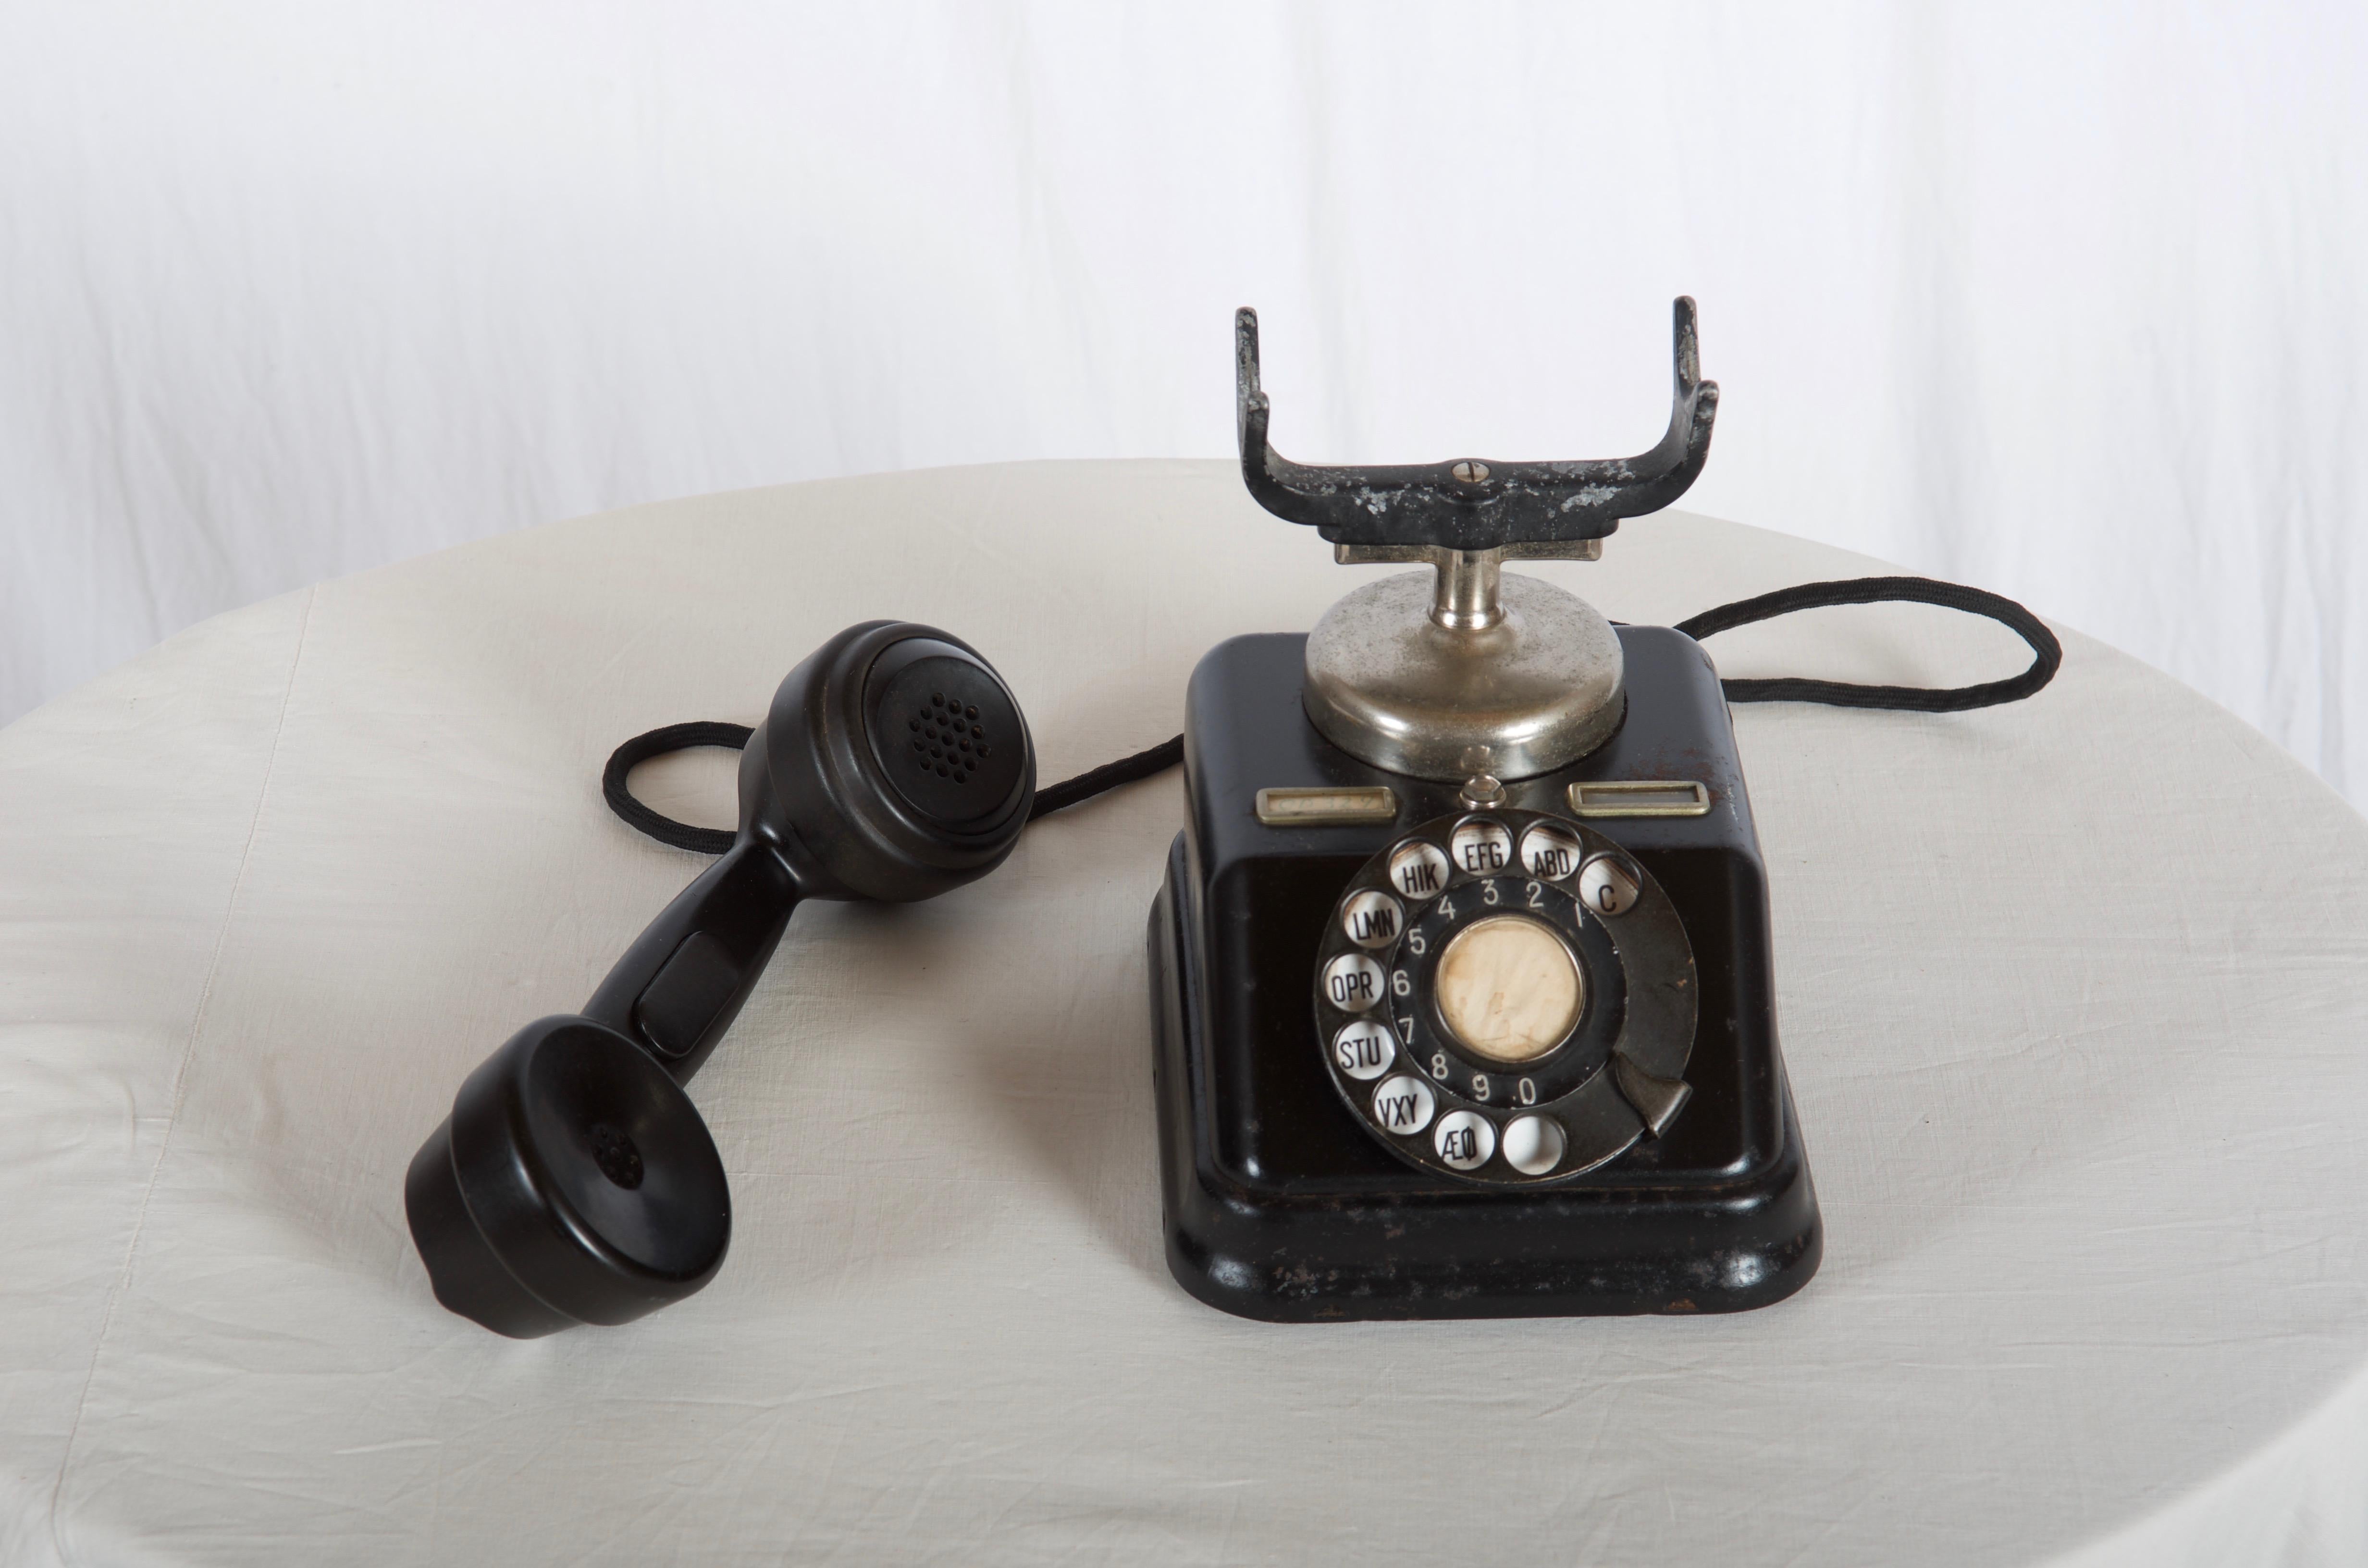 Bakelite table phone from the early 1950s.
 